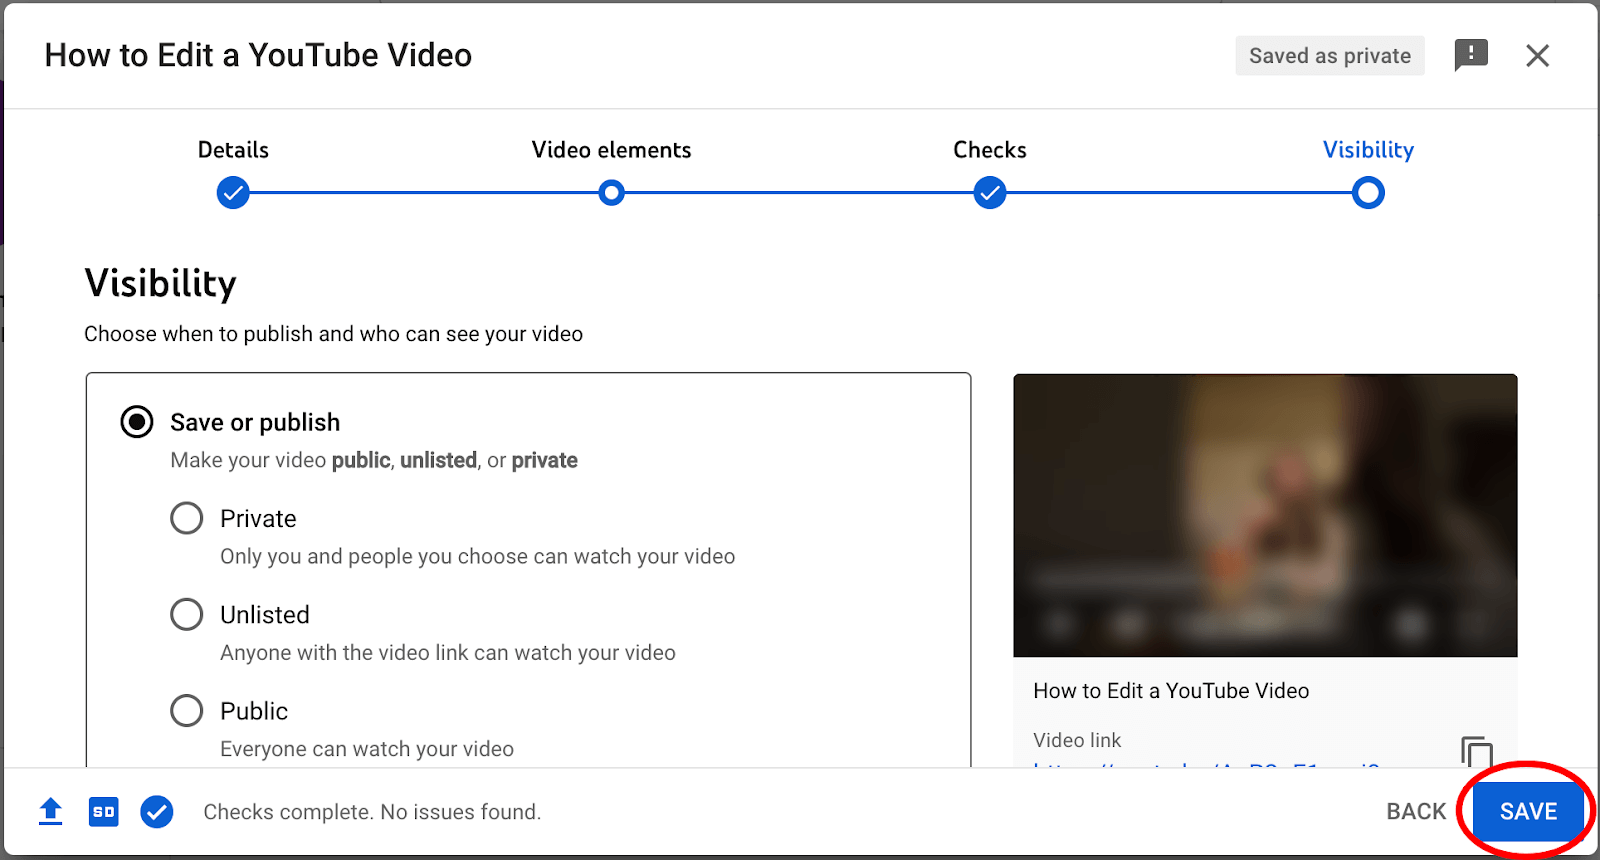 Visibility page for privacy settings of a YouTube video.